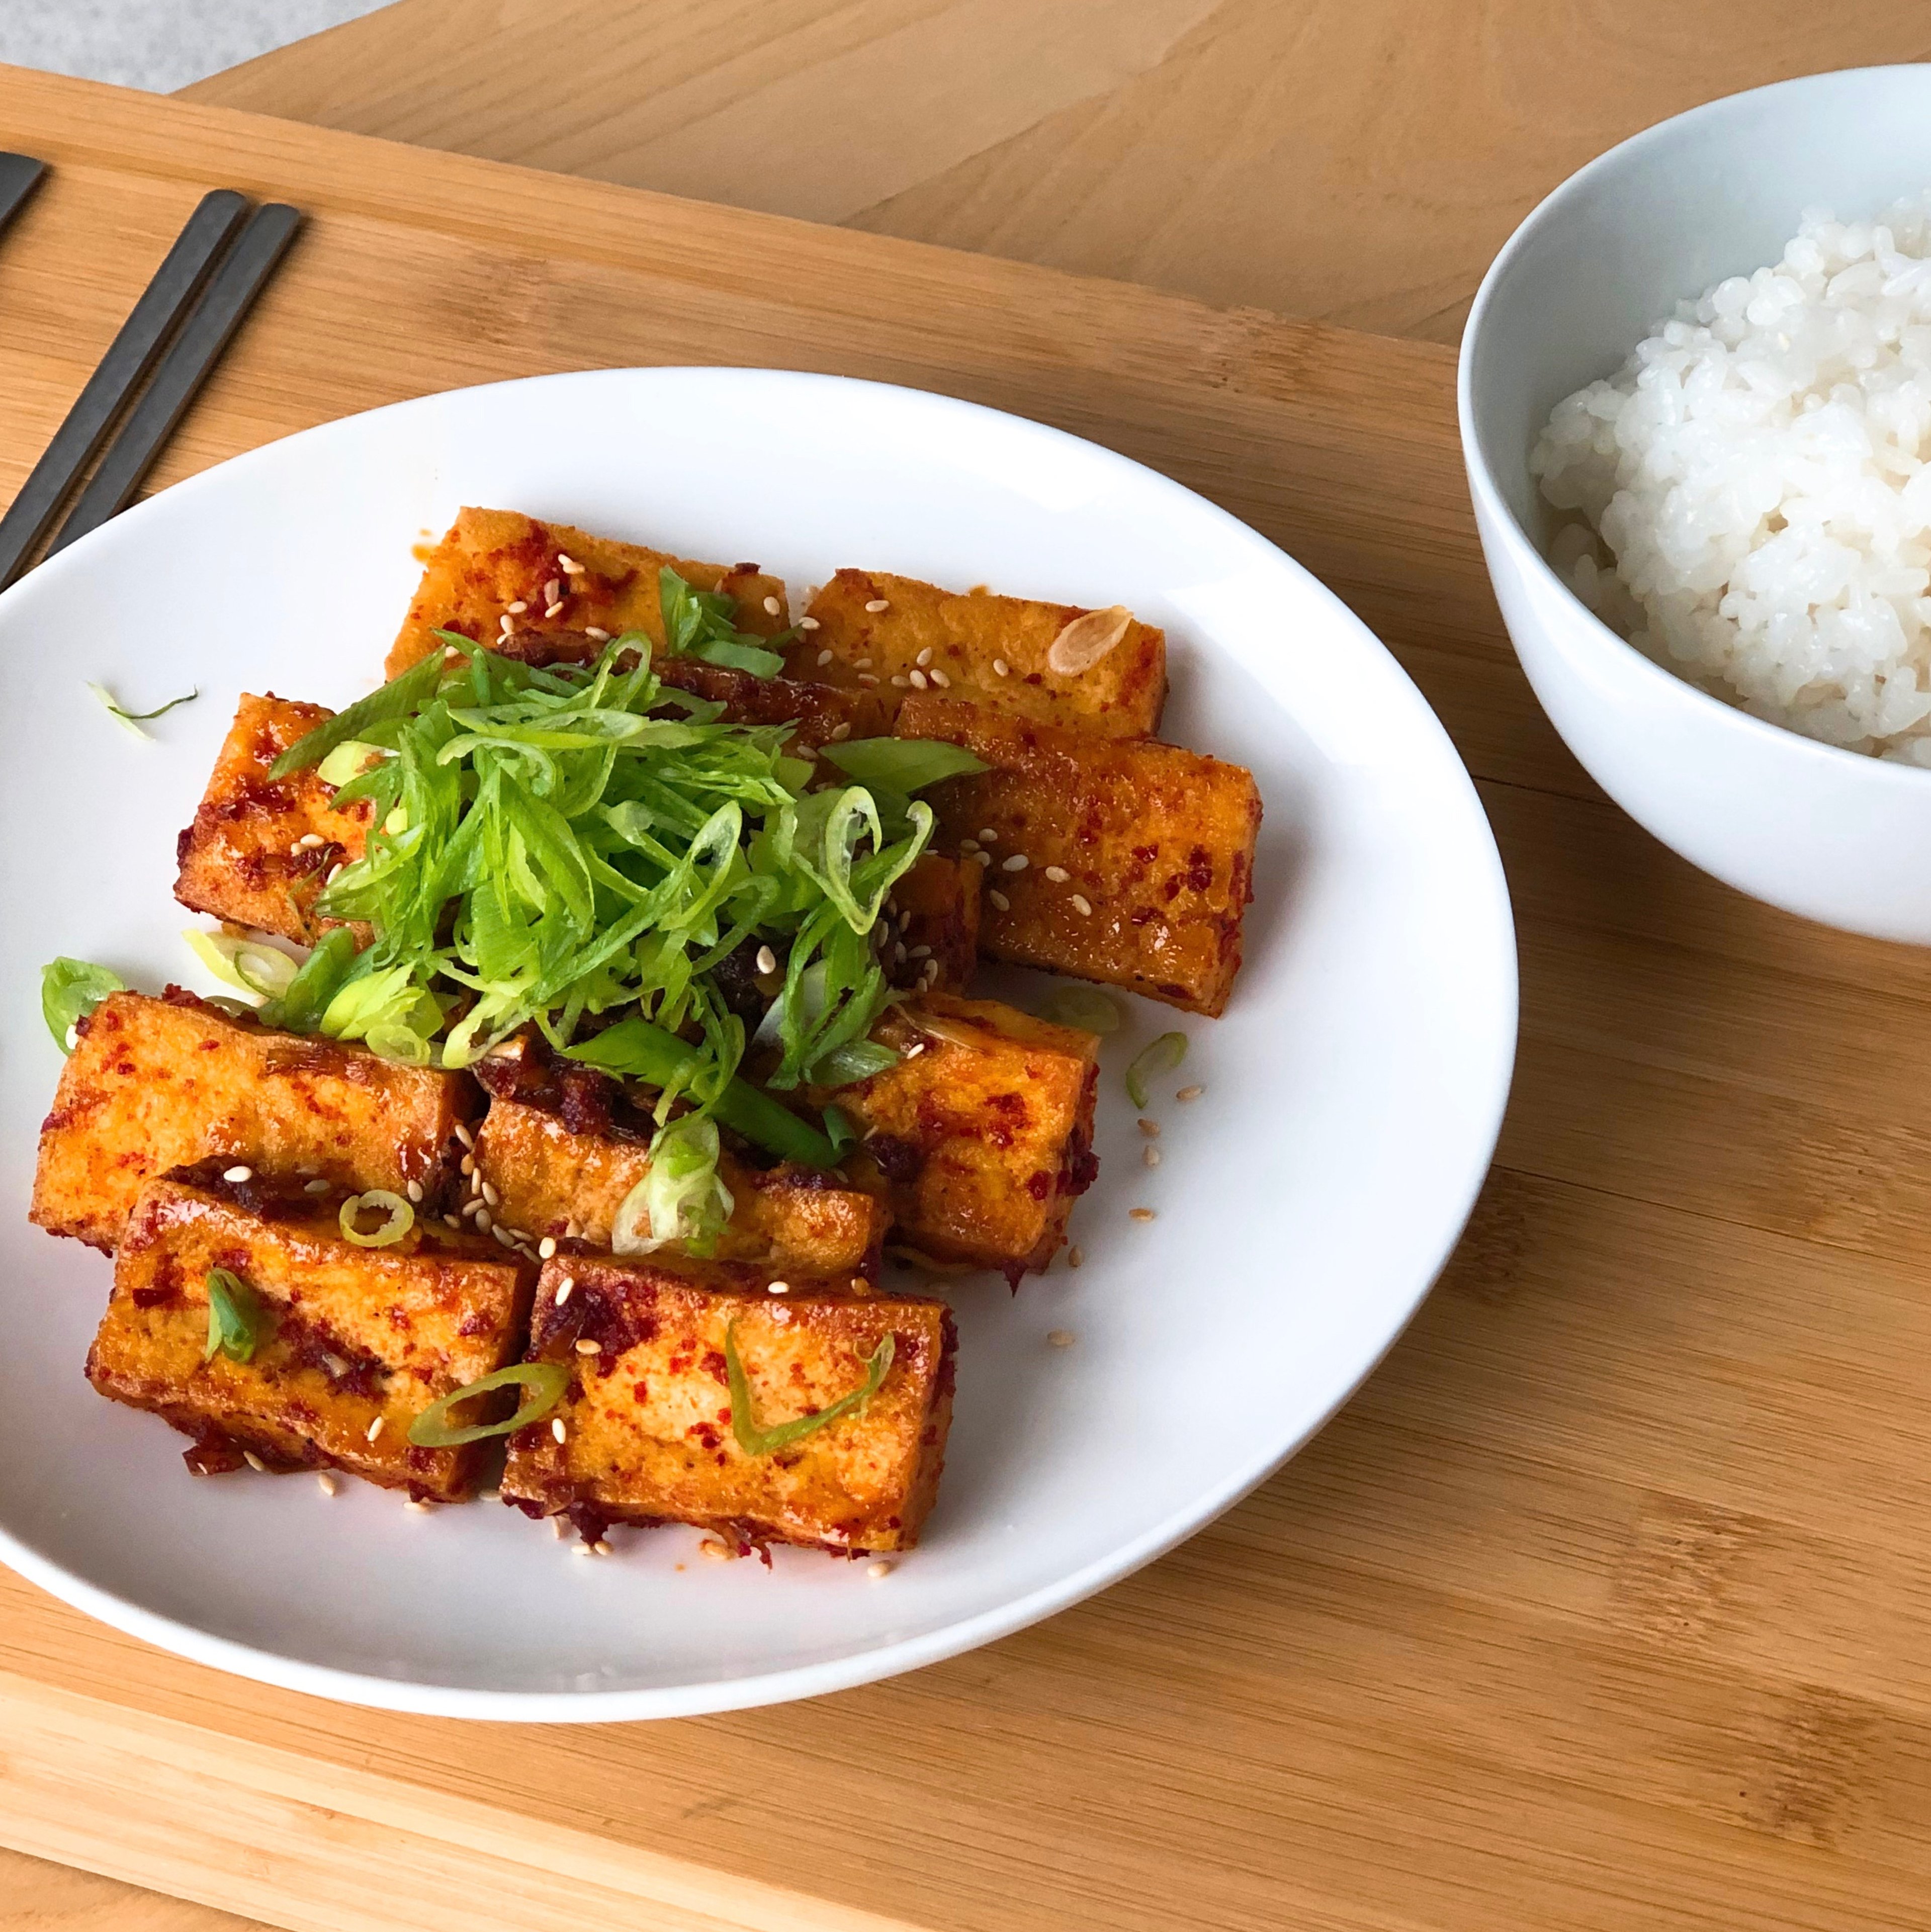 Braised Tofu in a Spicy & Savory Sauce (두부조림)